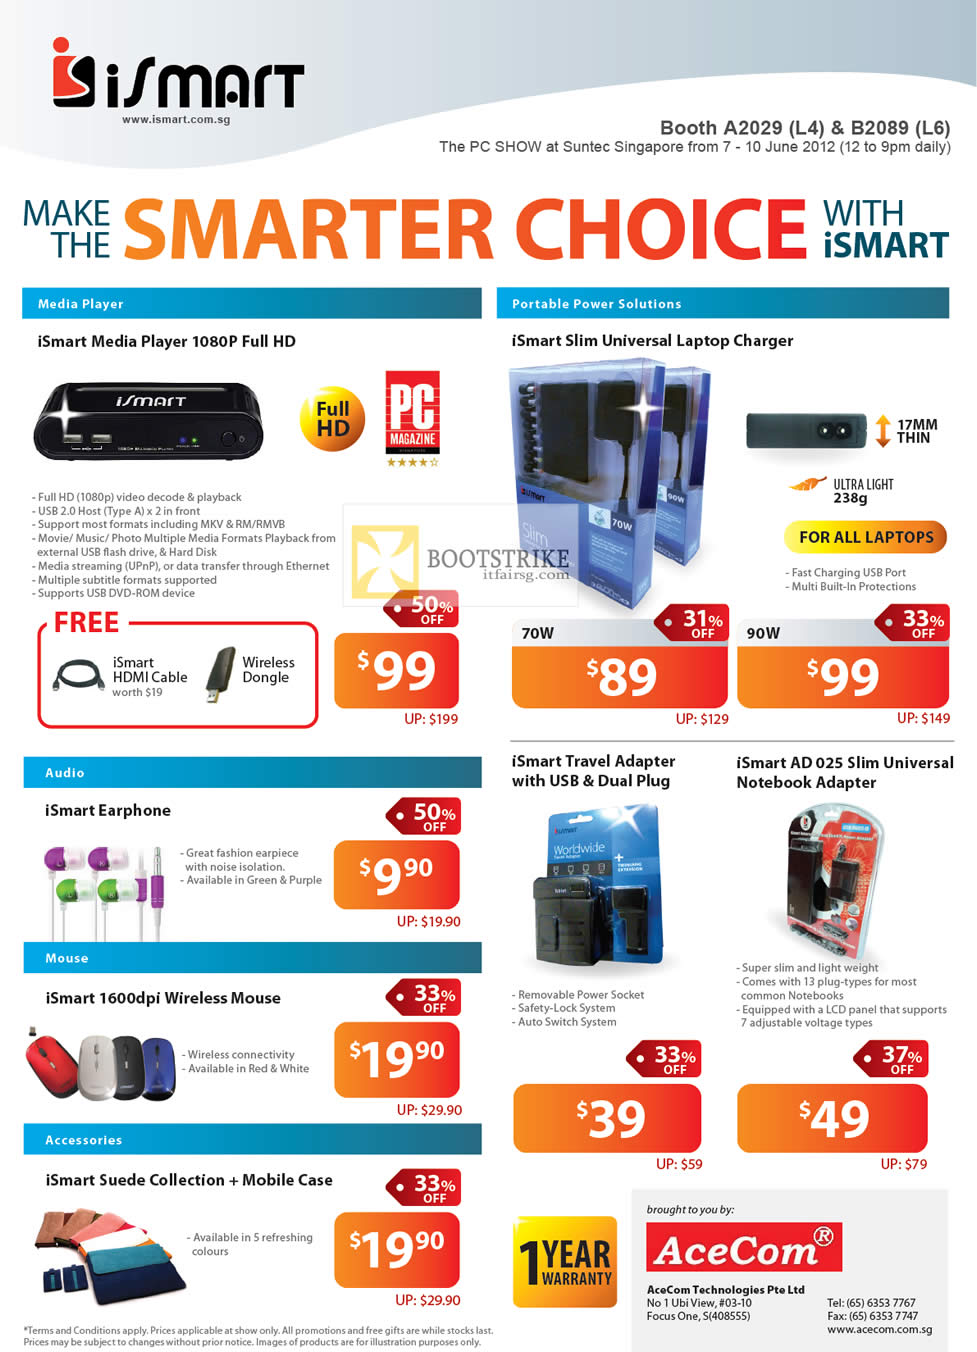 PC SHOW 2012 price list image brochure of ISmart Media Player, Slim Universal Notebook Charger, Travel Adapter, AD 025, Earphone, Mouse, Suede Case